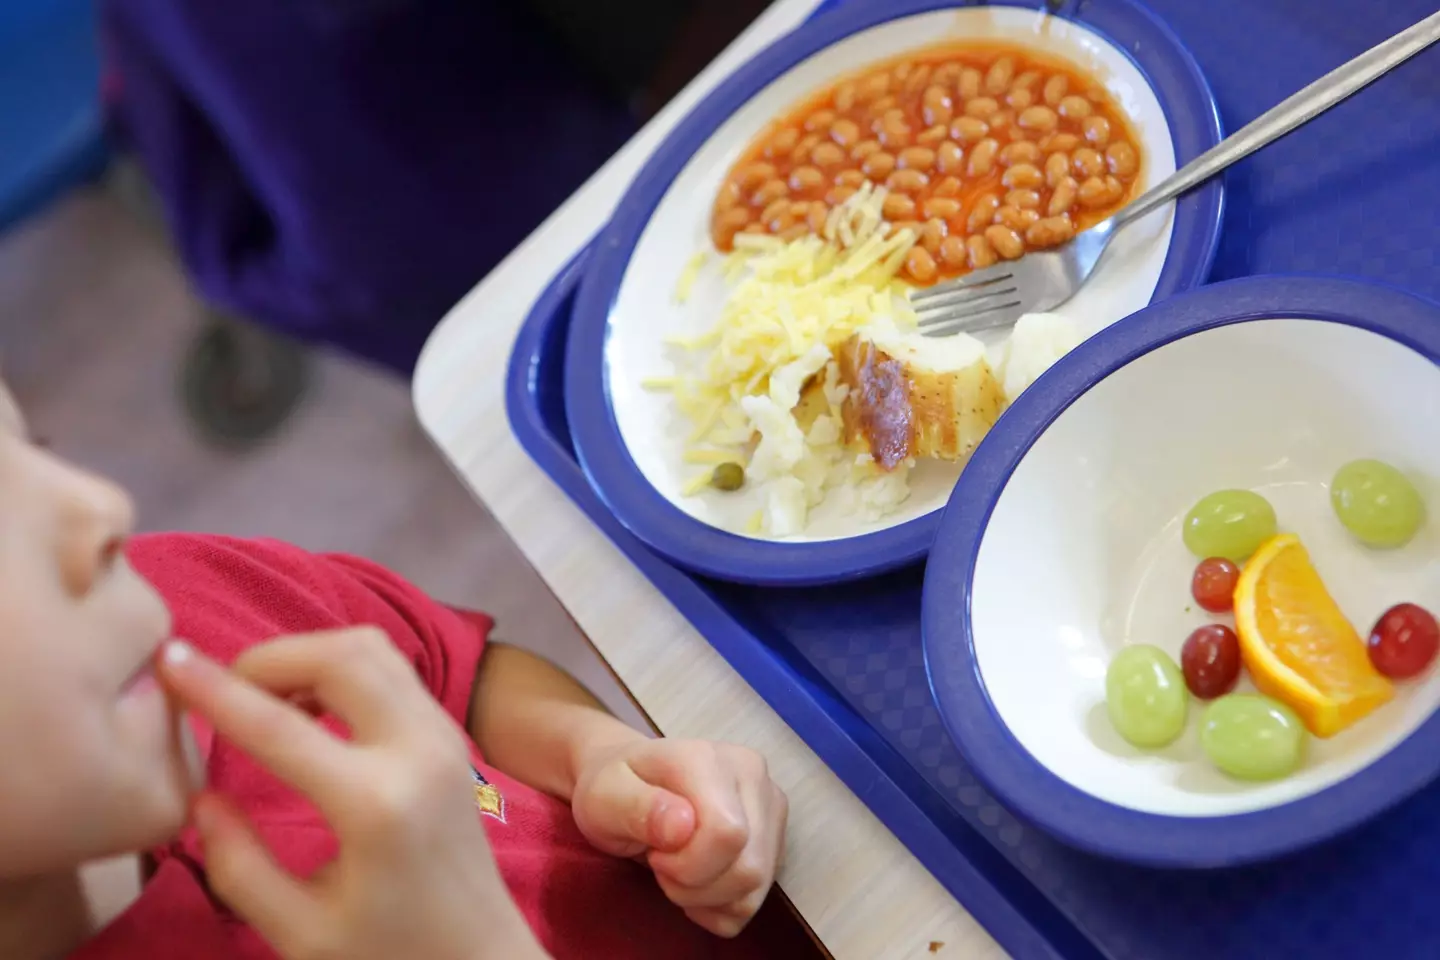 She said the arguments in favour of free school dinners are 'overwhelming'.